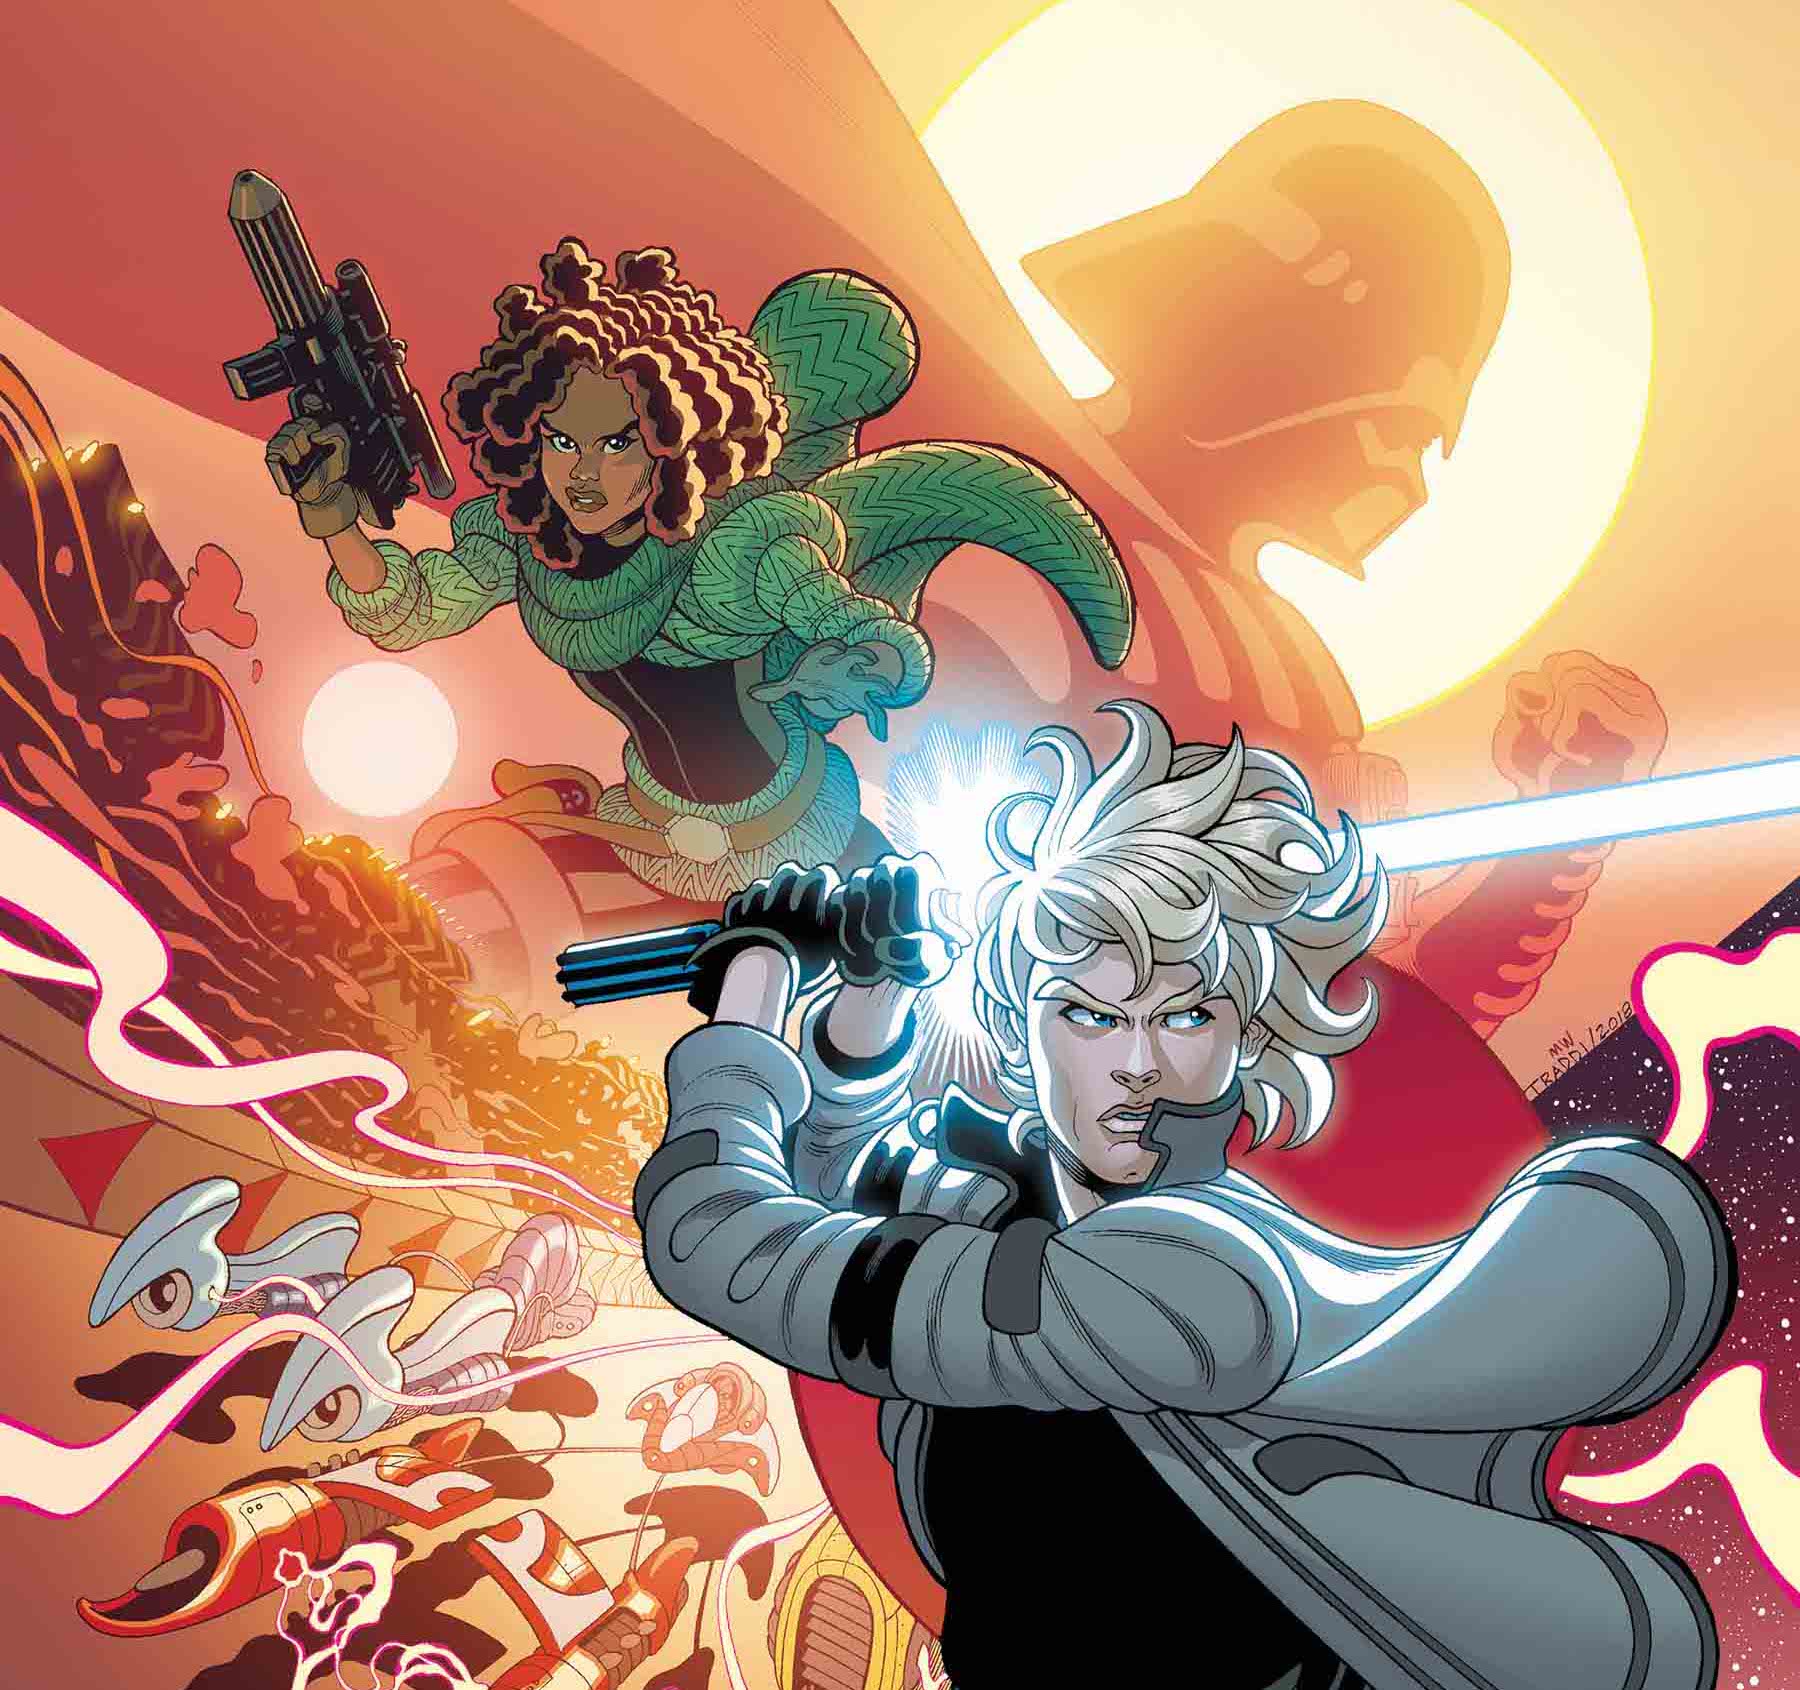 Star Wars Annual #4 Review: What every standalone comic should strive for